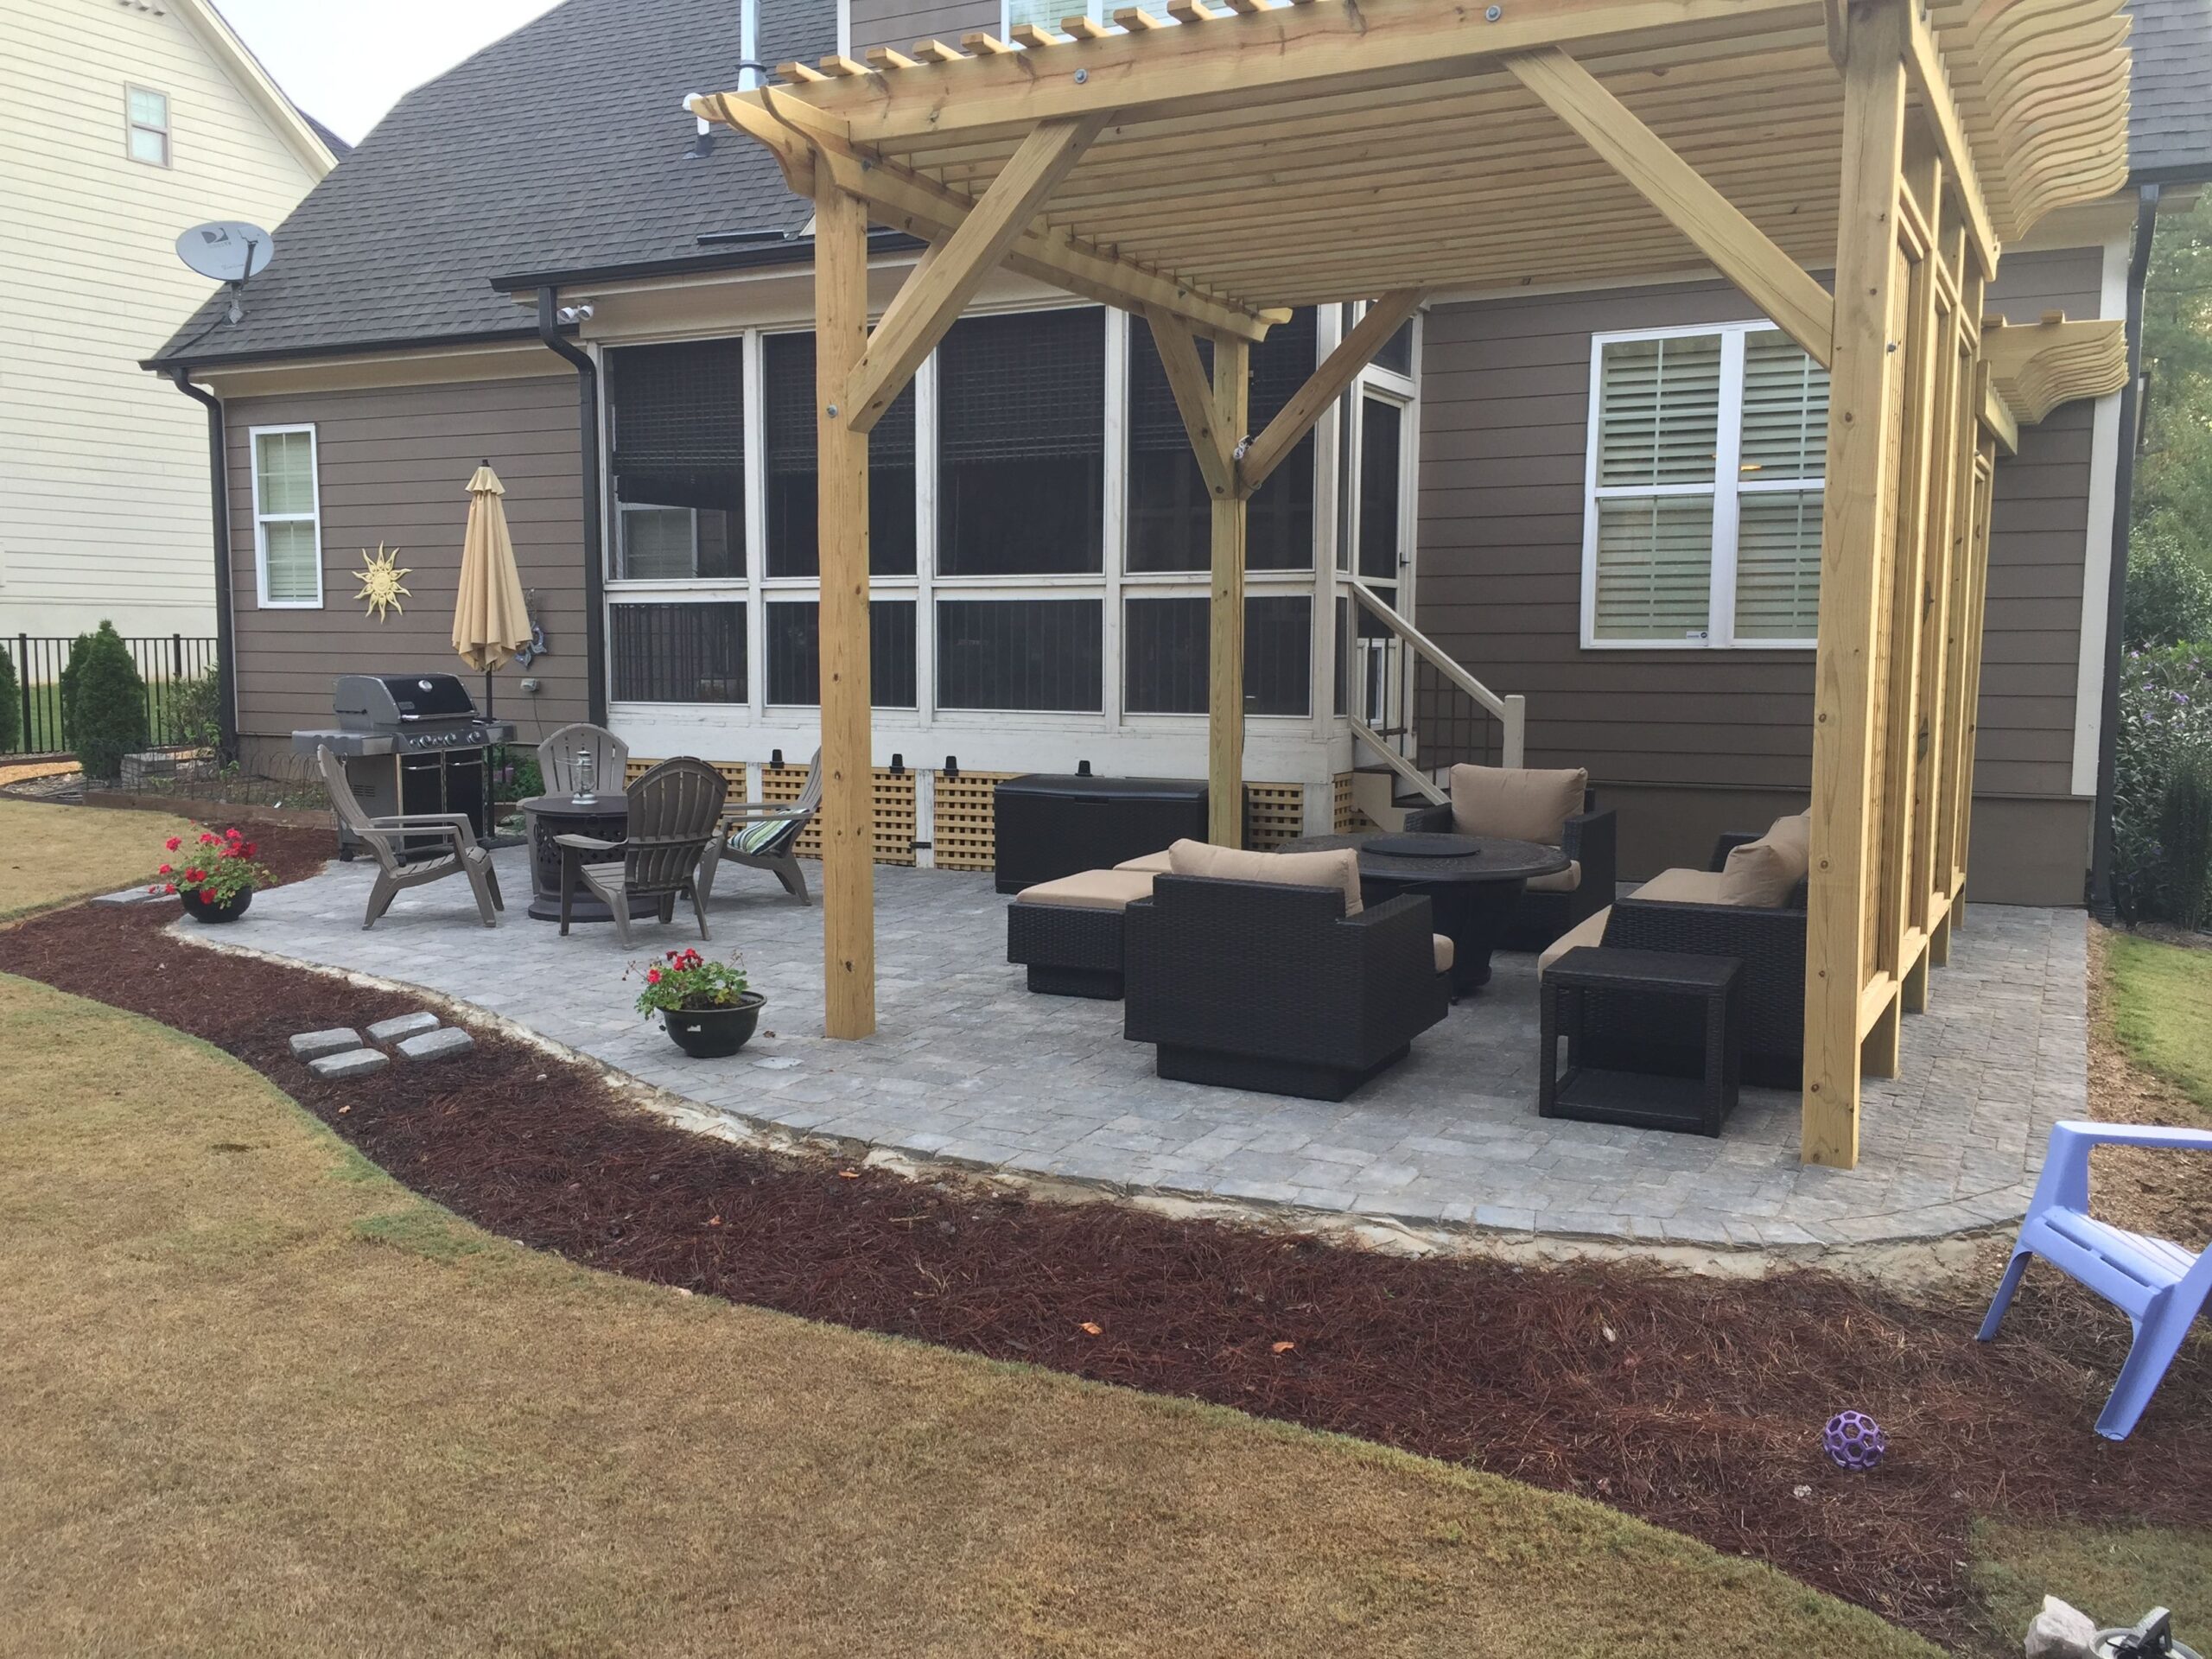 Outdoor living space with custom stone paver patio